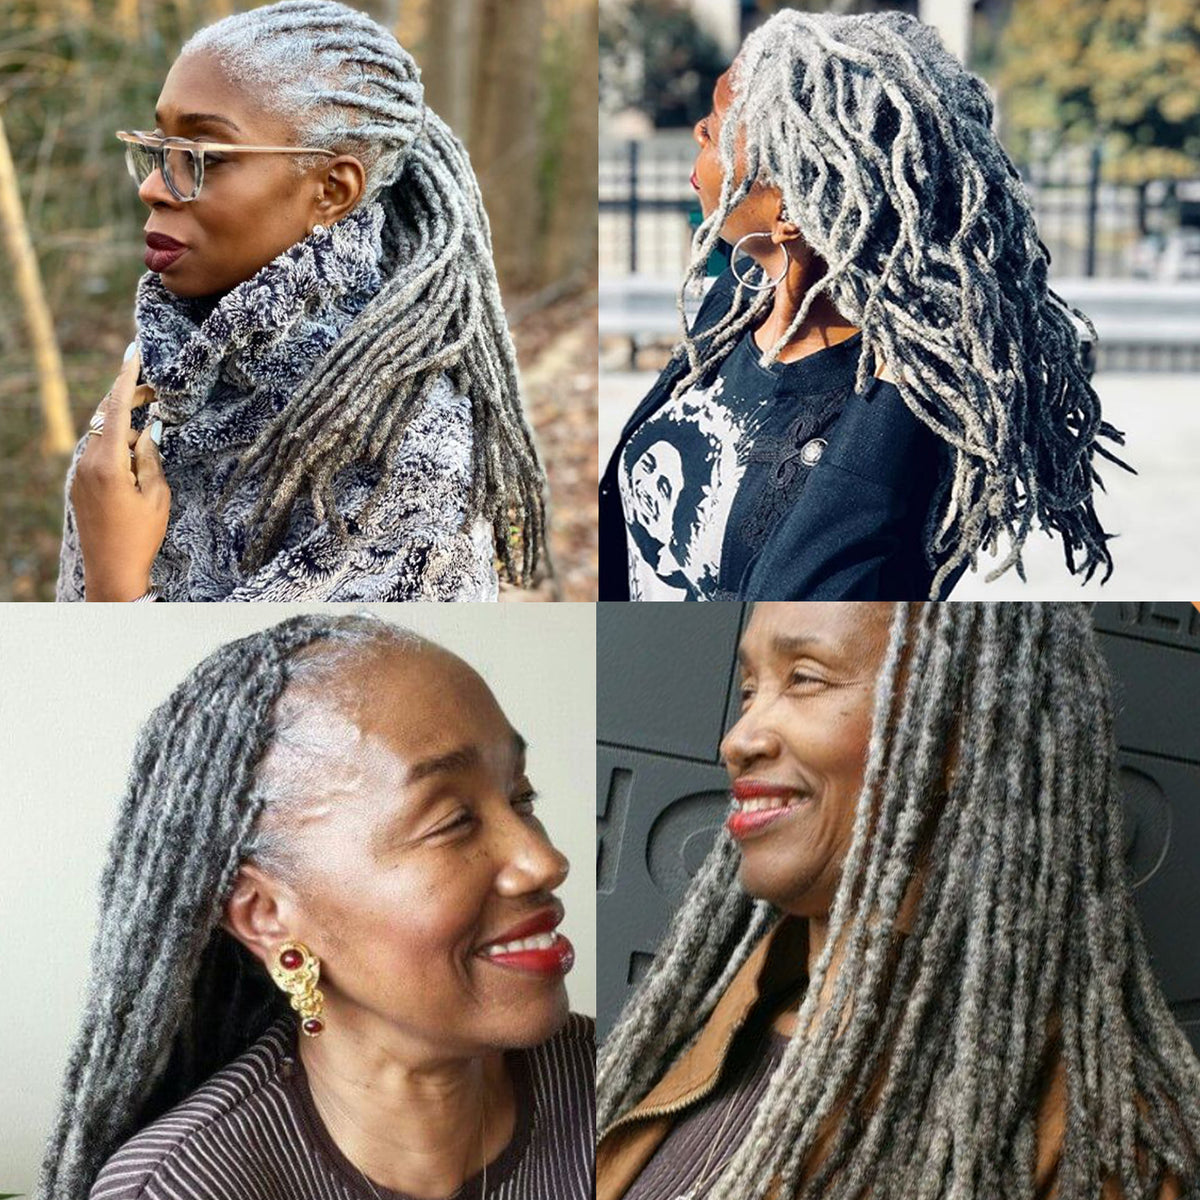 100% Human Hair Grey Dreadlock Extensions 16Inch 10 Strands Handmade Natural Loc Extensions Human Hair Bundle Dreads Extensions For Woman & Men Can be Dyed & Bleached (Gray 16inch length 0.6cm Width)